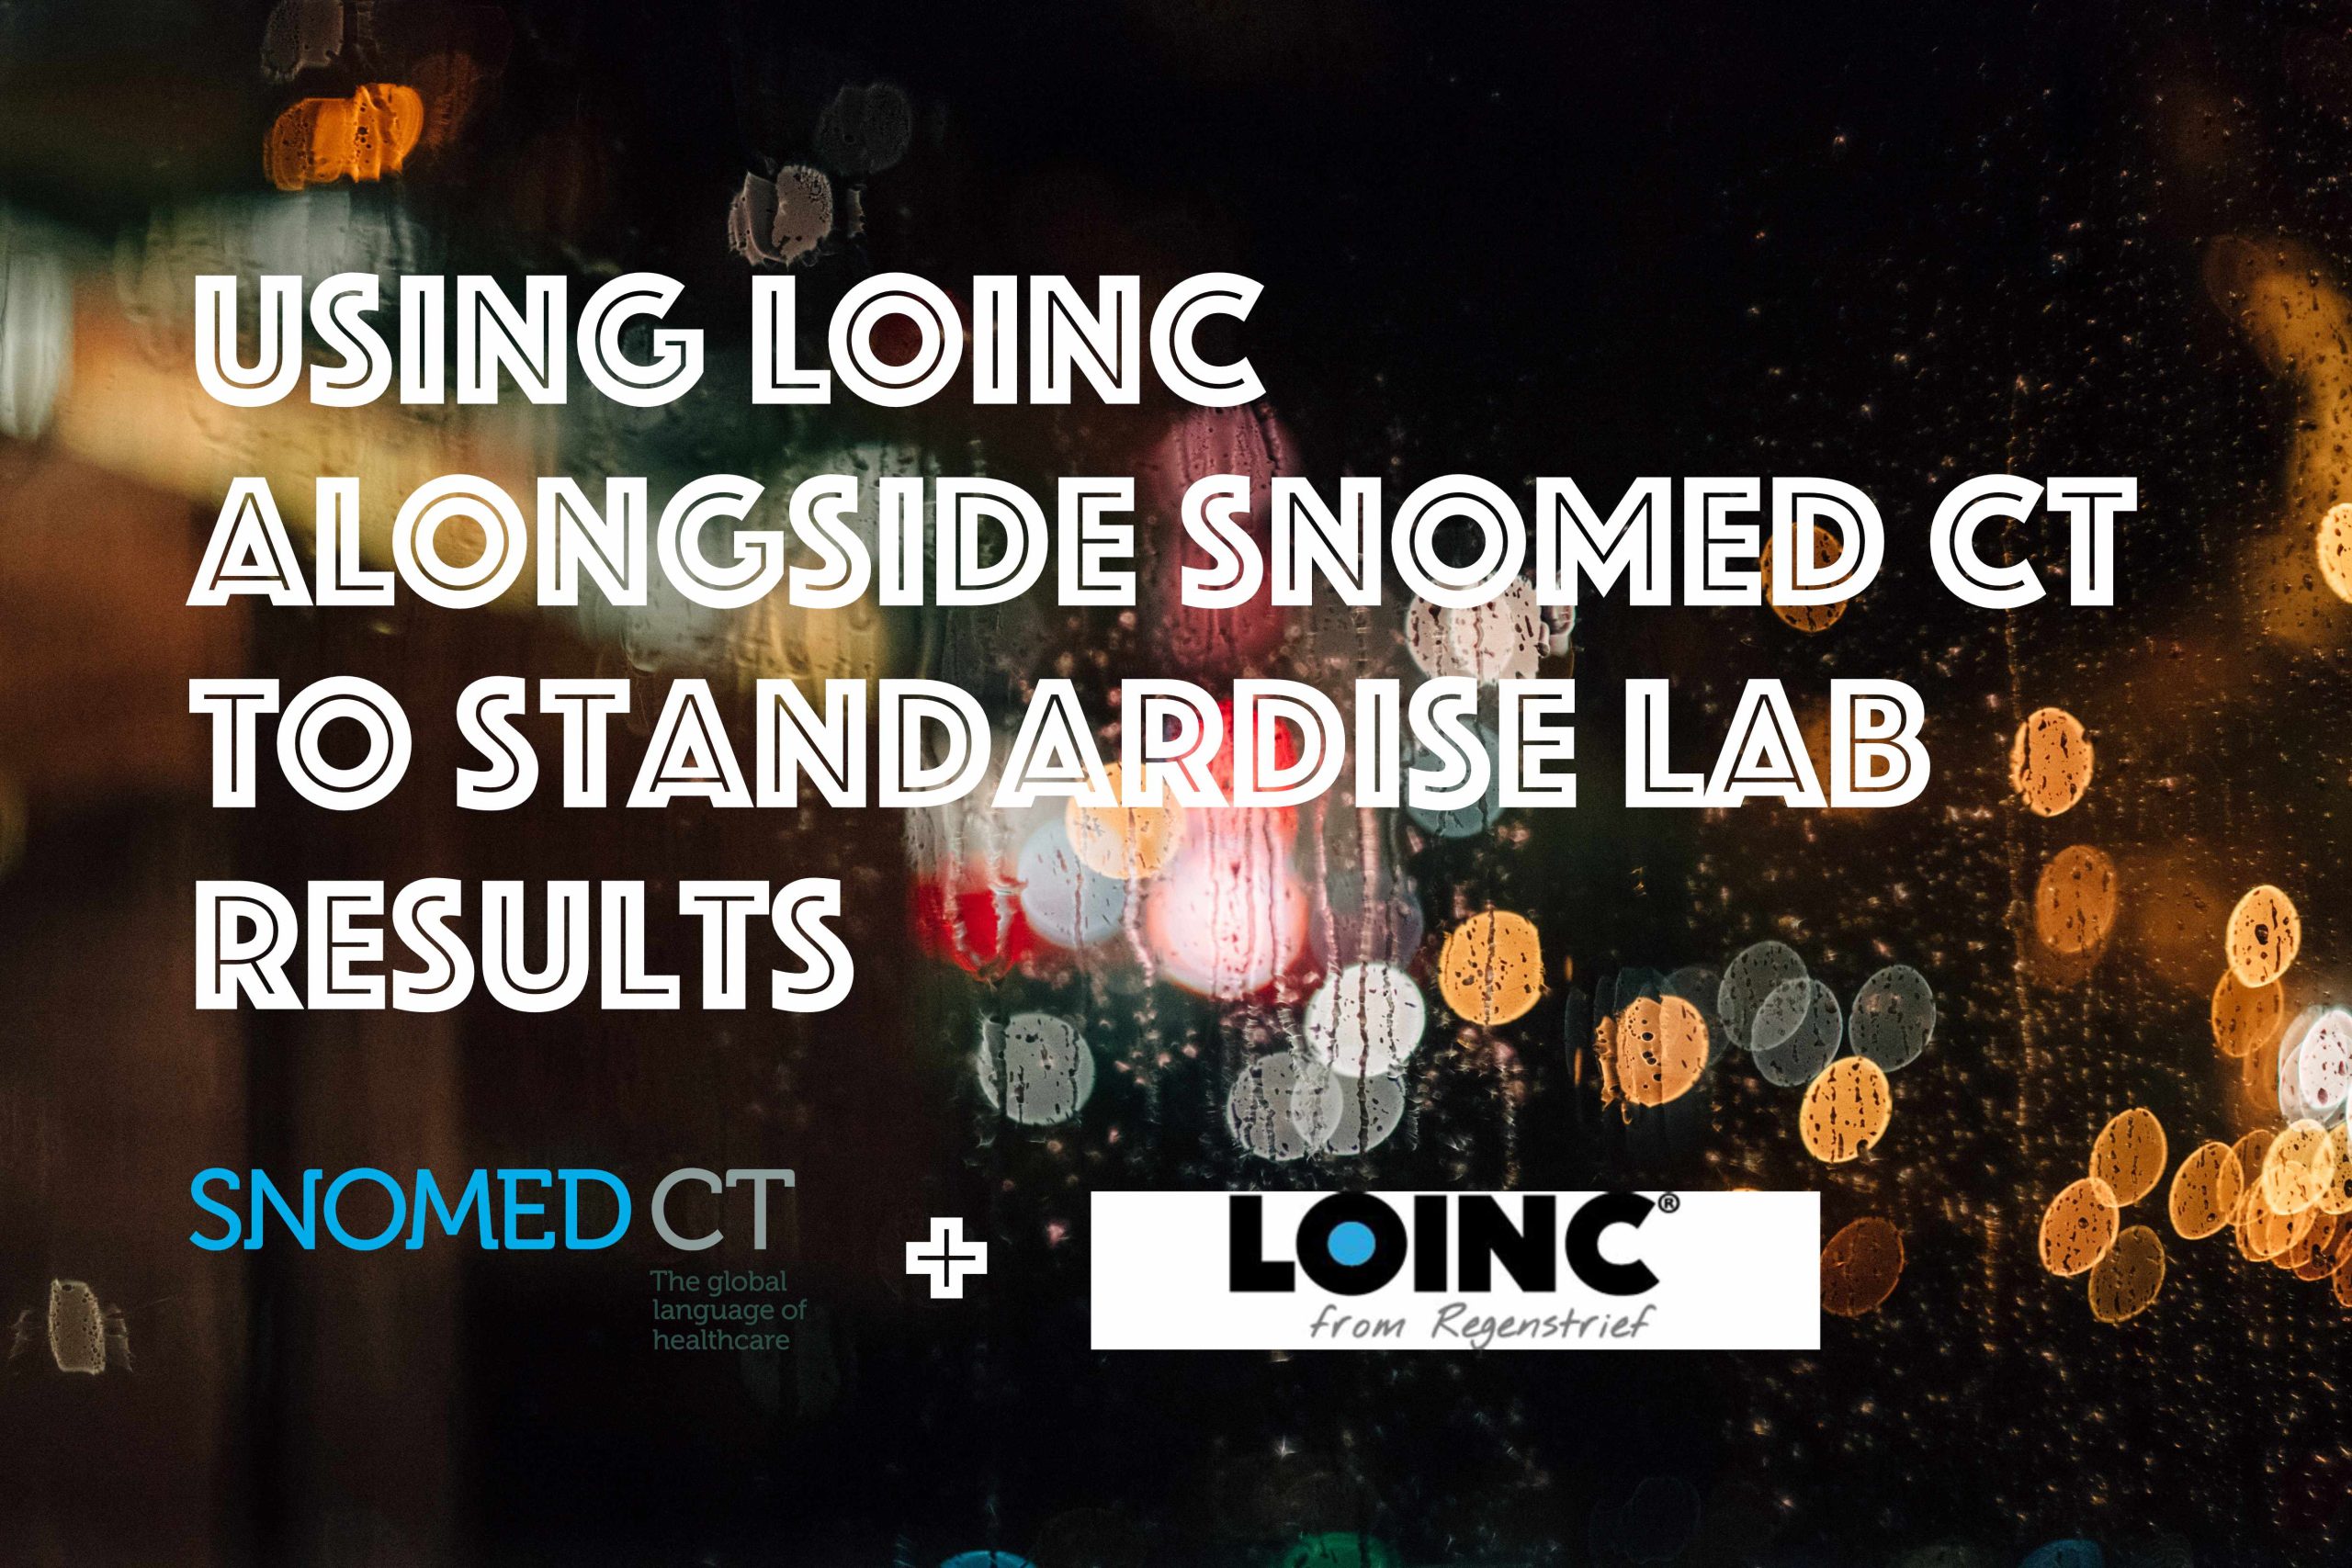 LOINC and SNOMED CT: LOINC SNOMED CT Extension – Why, What and How